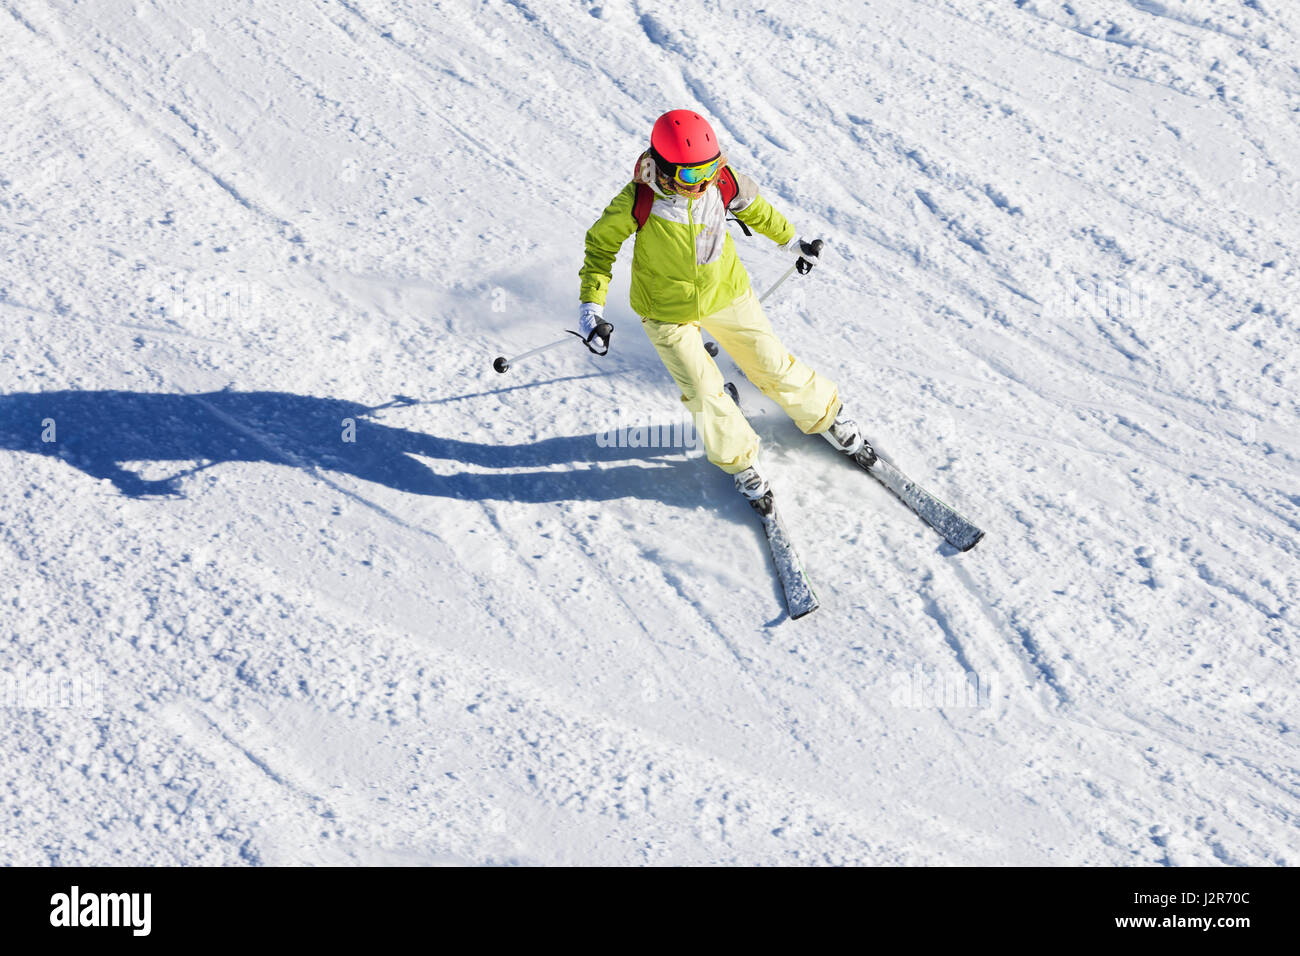 Top view portrait of female skier hitting the slopes at sunny day Stock Photo